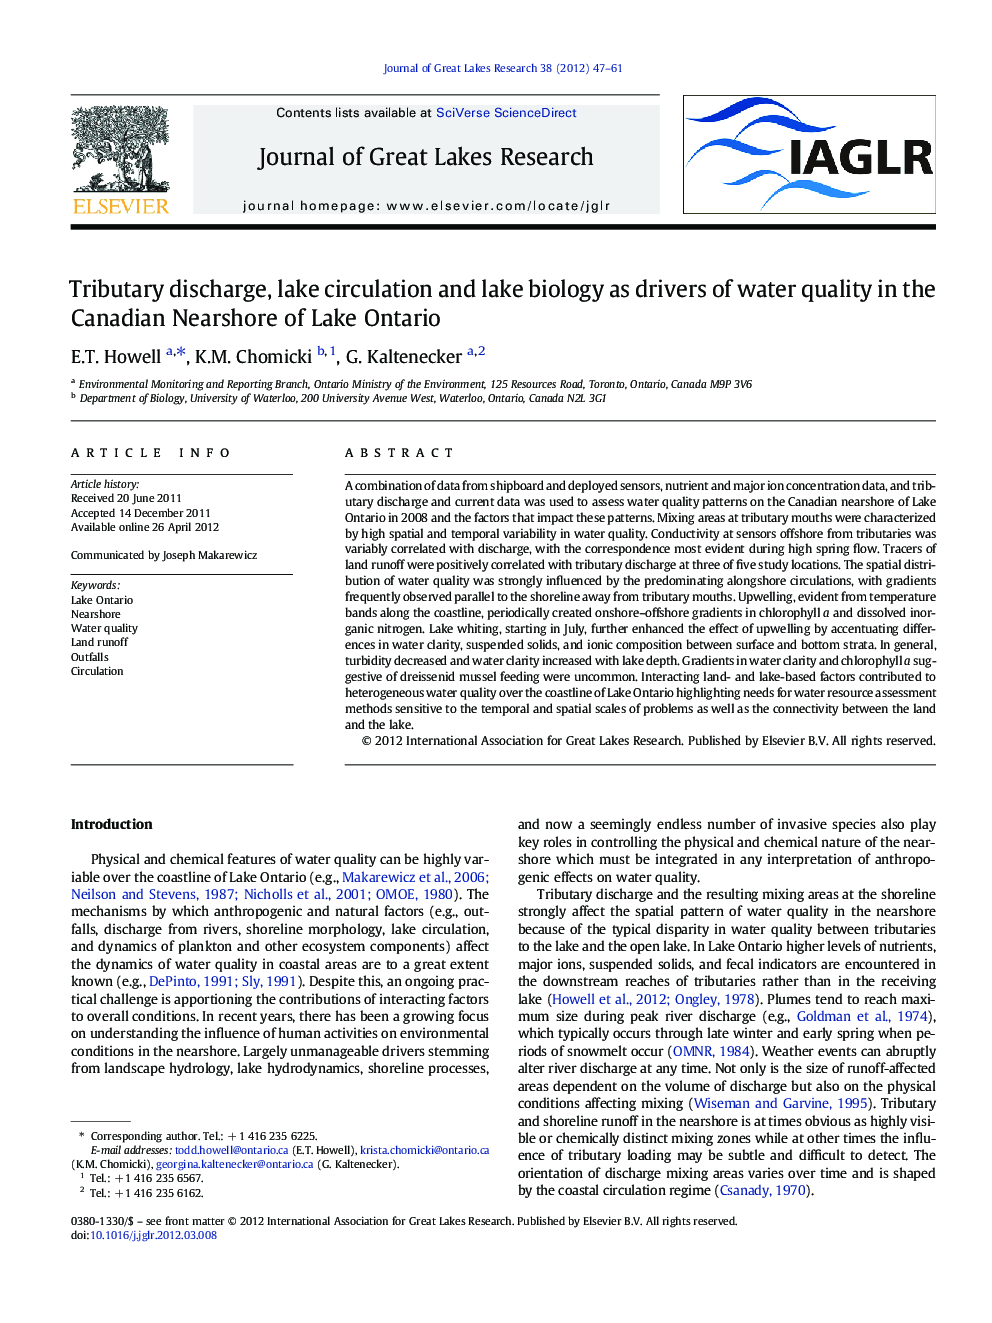 Tributary discharge, lake circulation and lake biology as drivers of water quality in the Canadian Nearshore of Lake Ontario